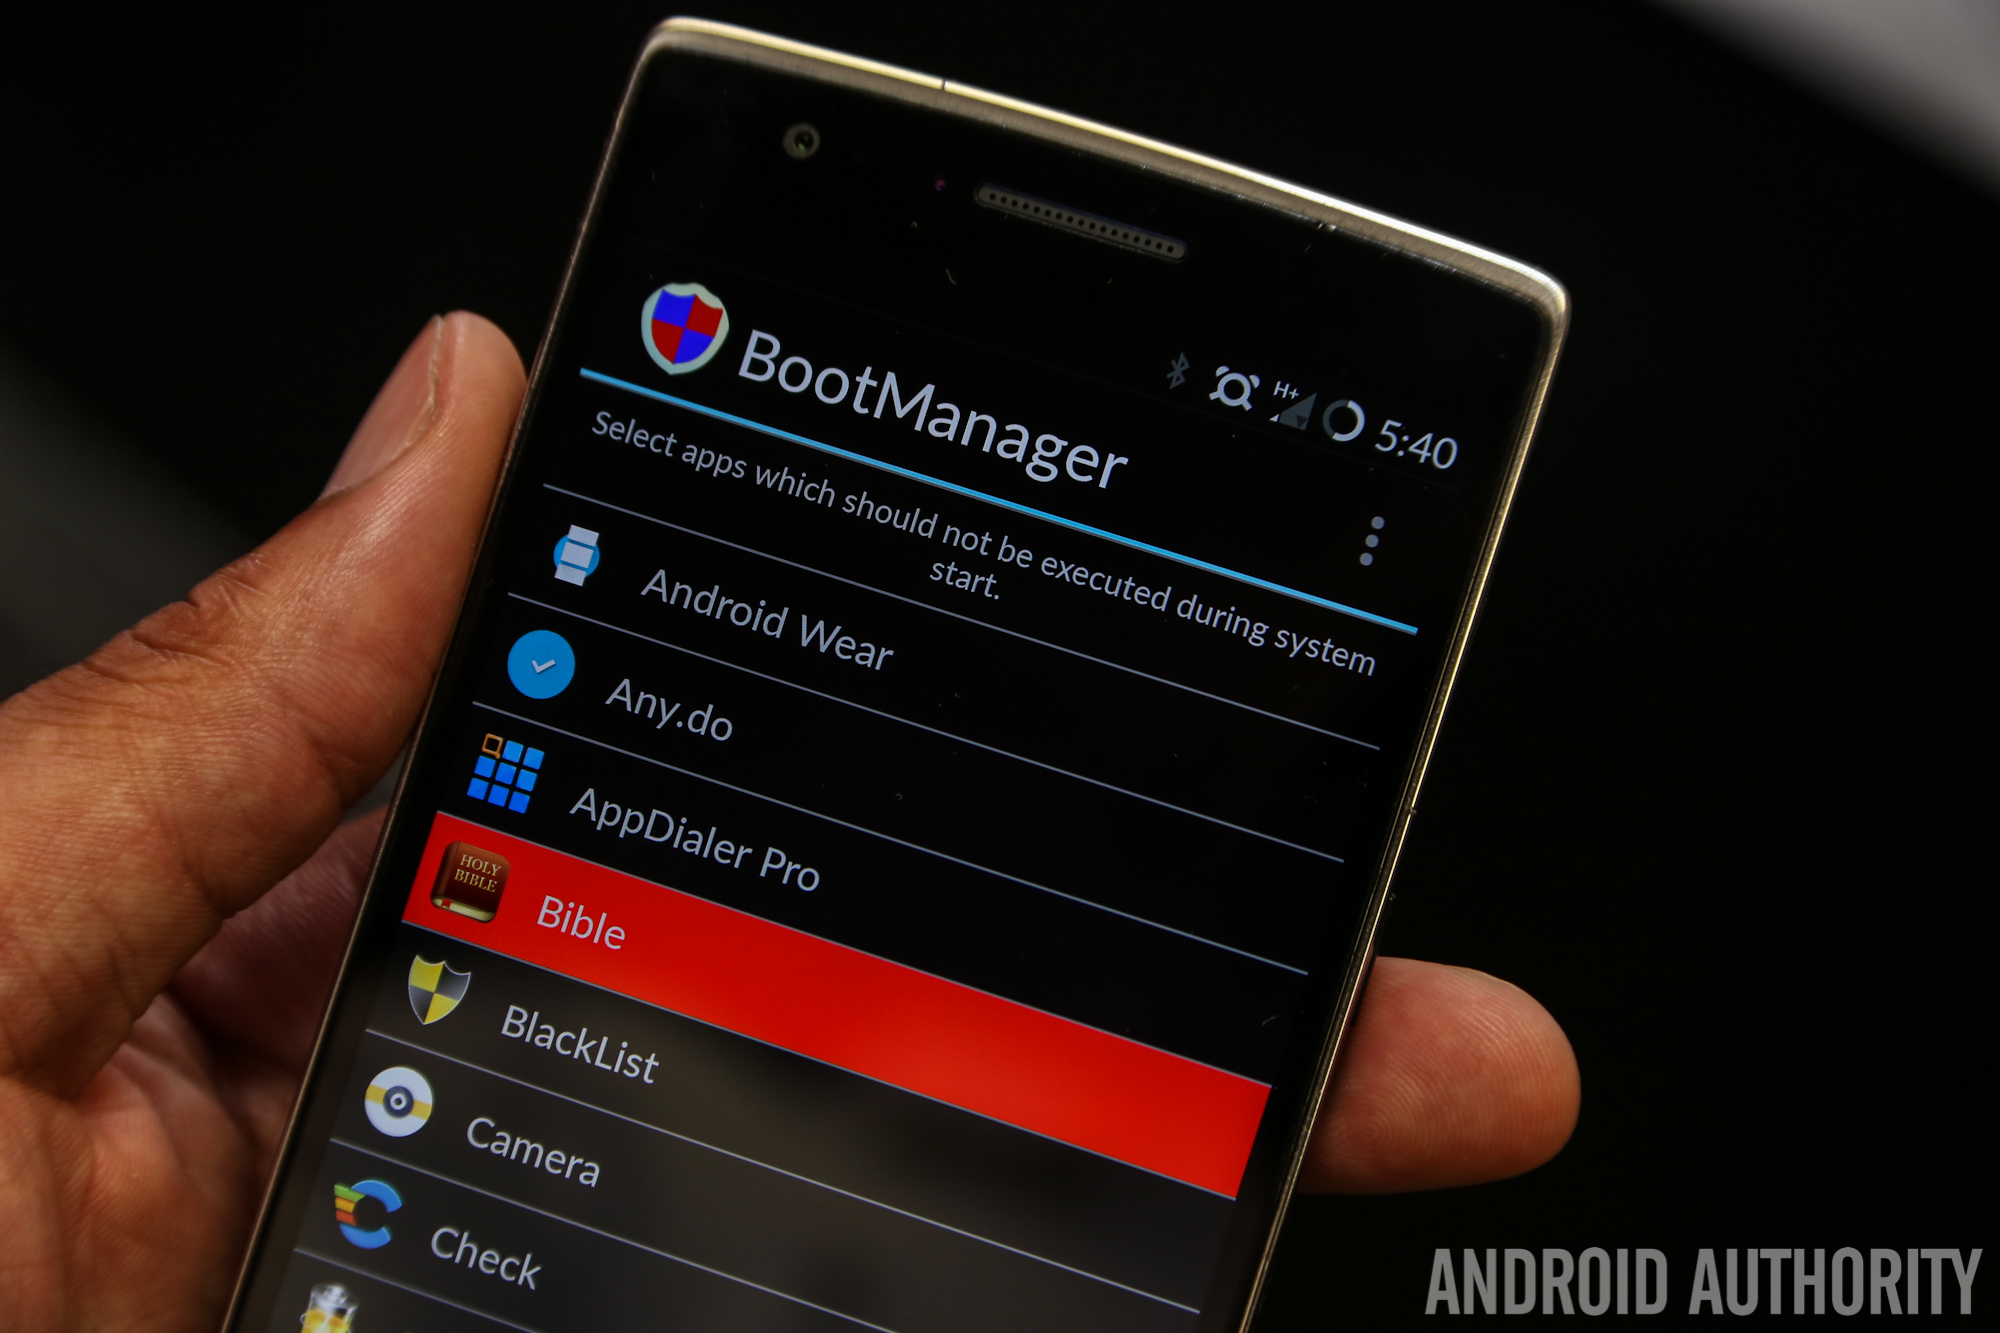 OnePlus-One-Android Xposed framework-bootmanager-3-2